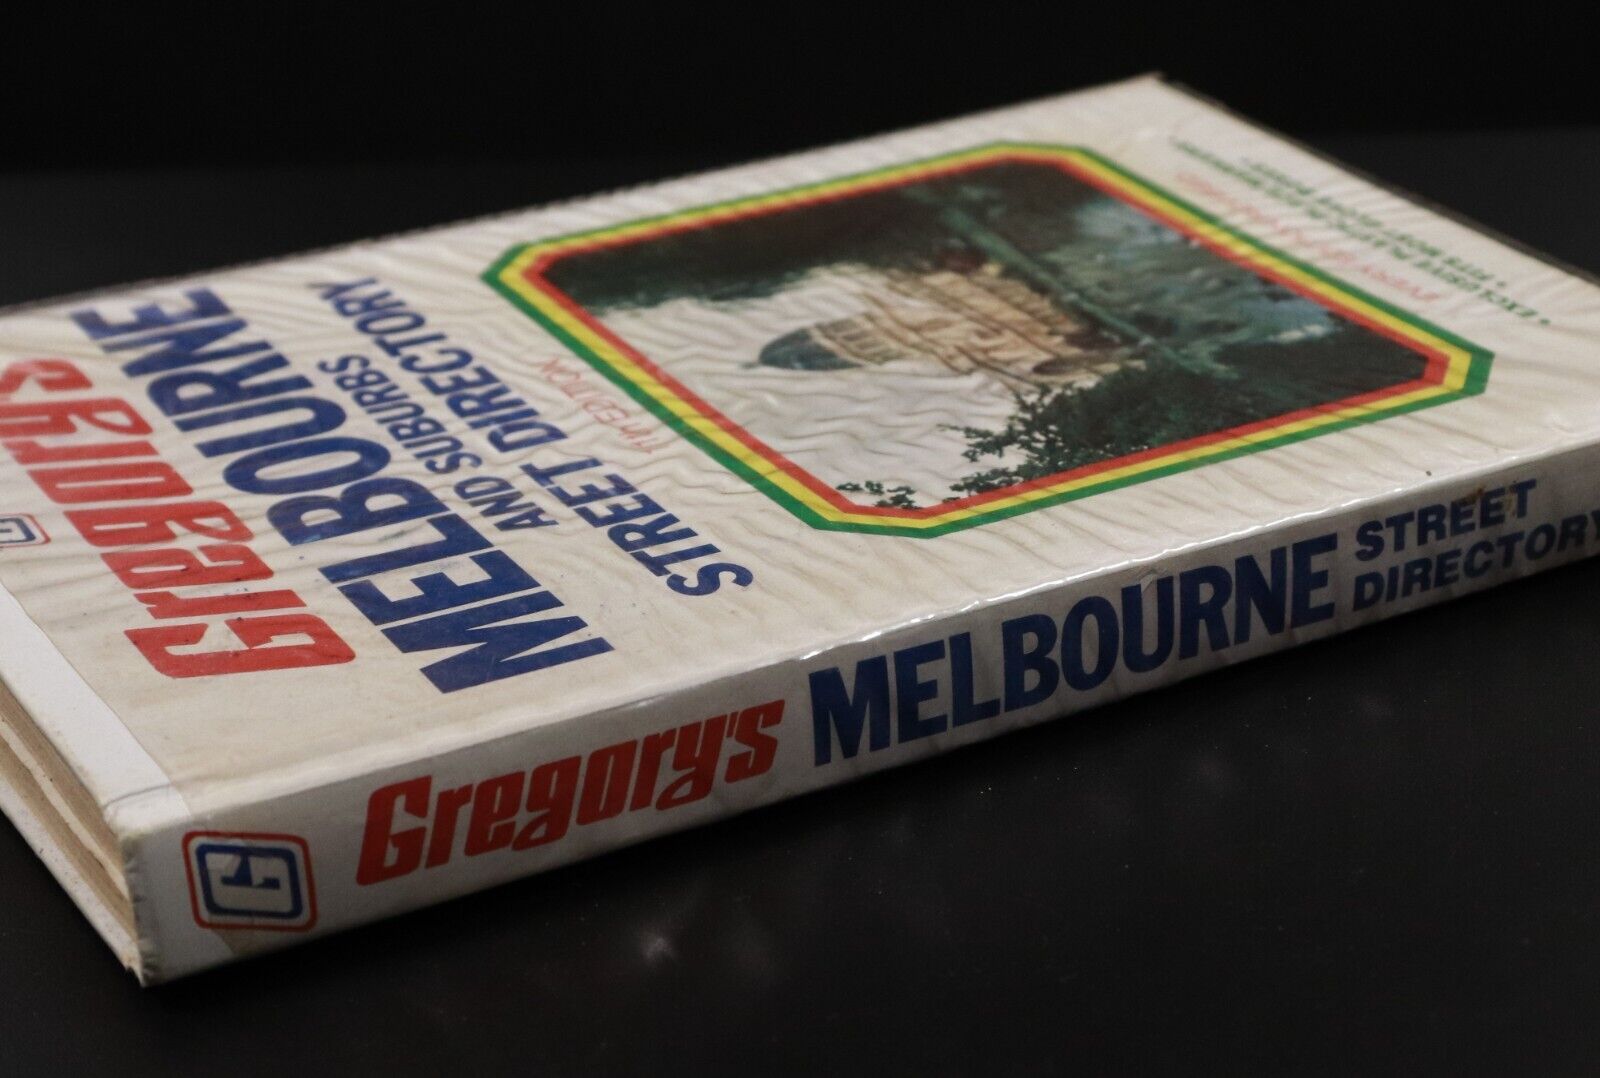 1977 Gregory's Street Directory Of Melbourne & Suburbs Vintage Maps Book